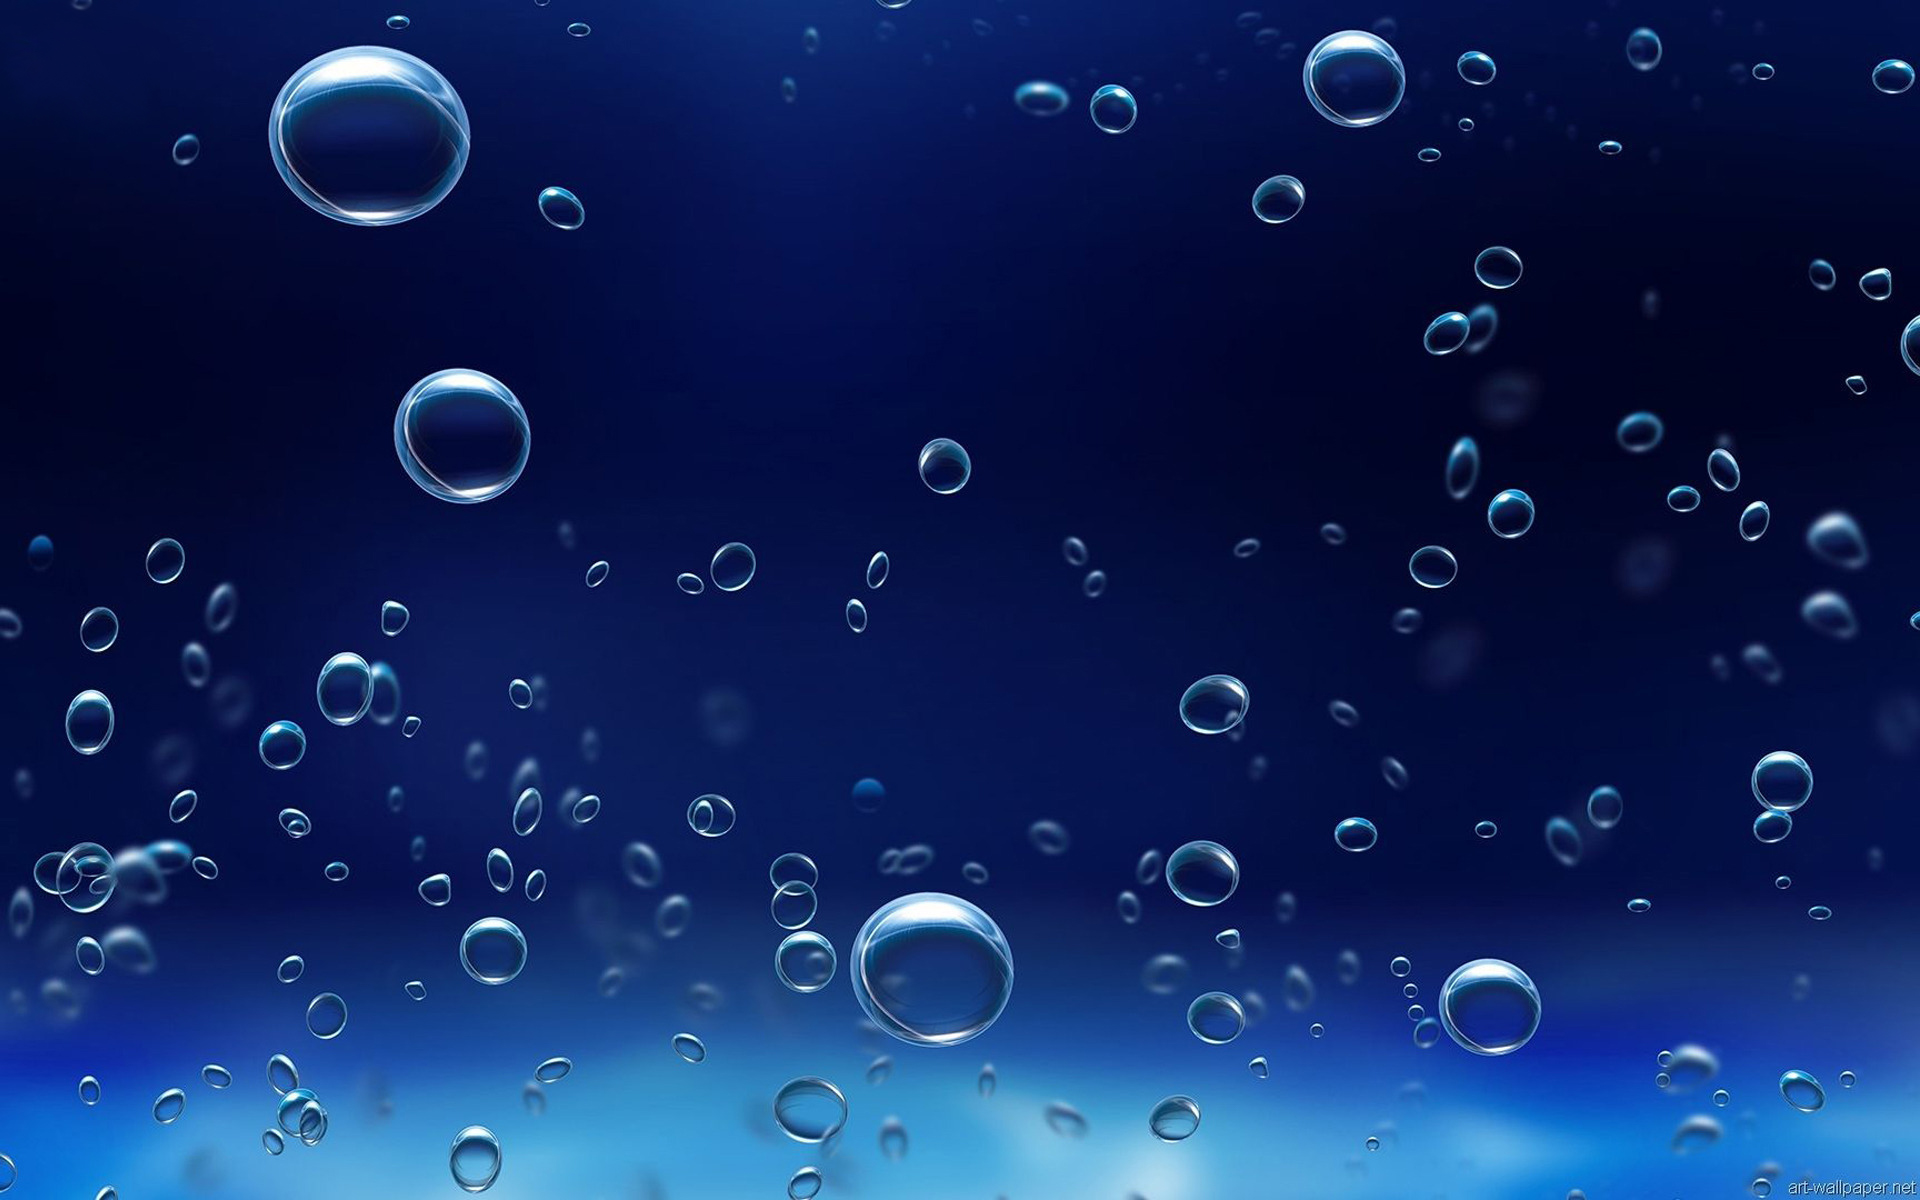 Free bubbles backgrounds for. Bubble clipart underwater